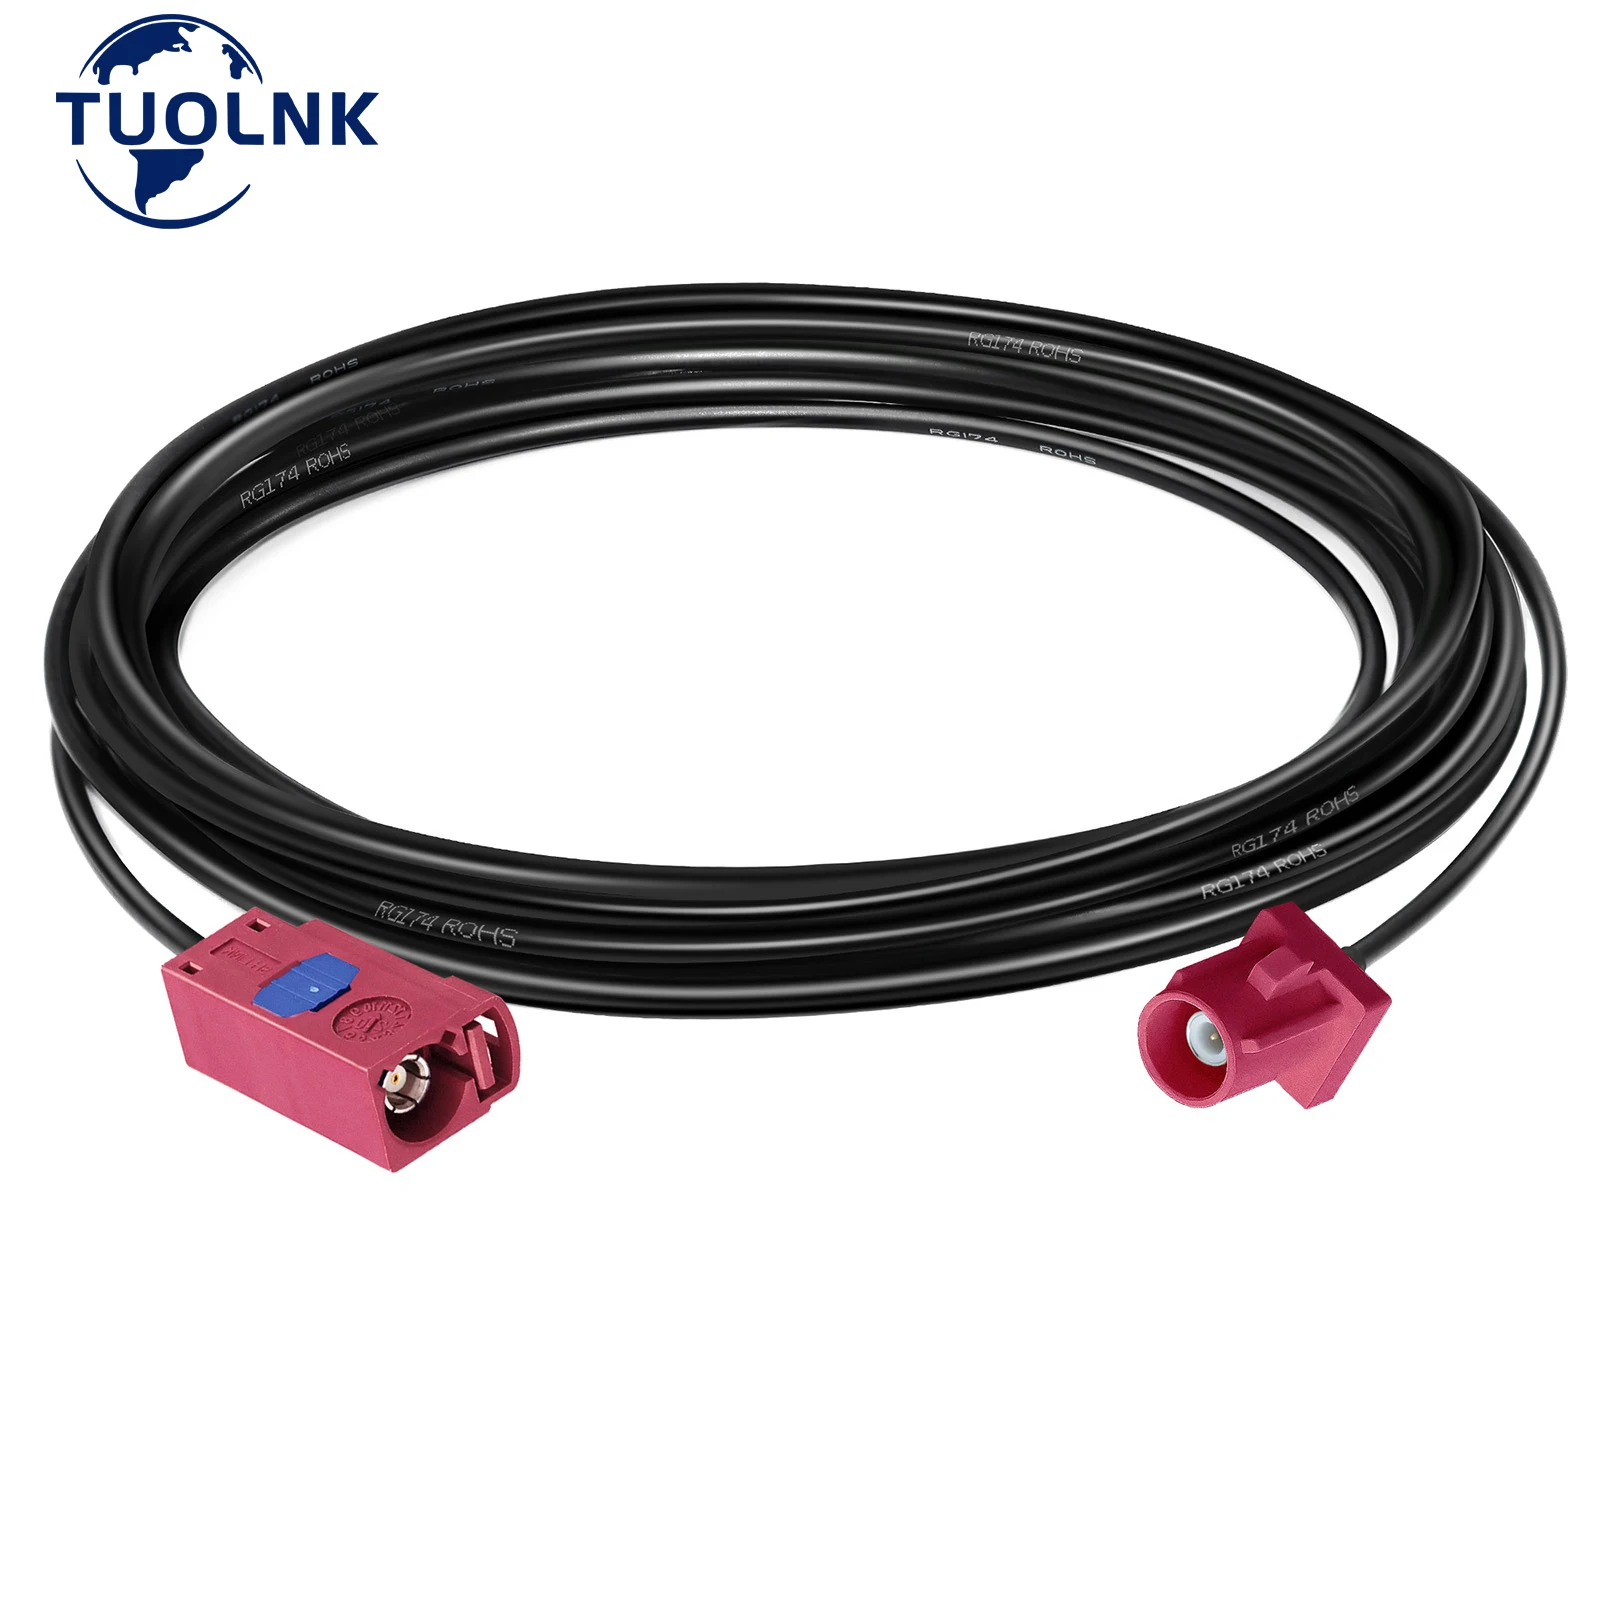 Fakra L Cable RG174 Fakra L Male to Female Coaxial Cable Car Radio Antenna Extension Cable Radio Pigtail Cable 15cm 20cm 5M 8M